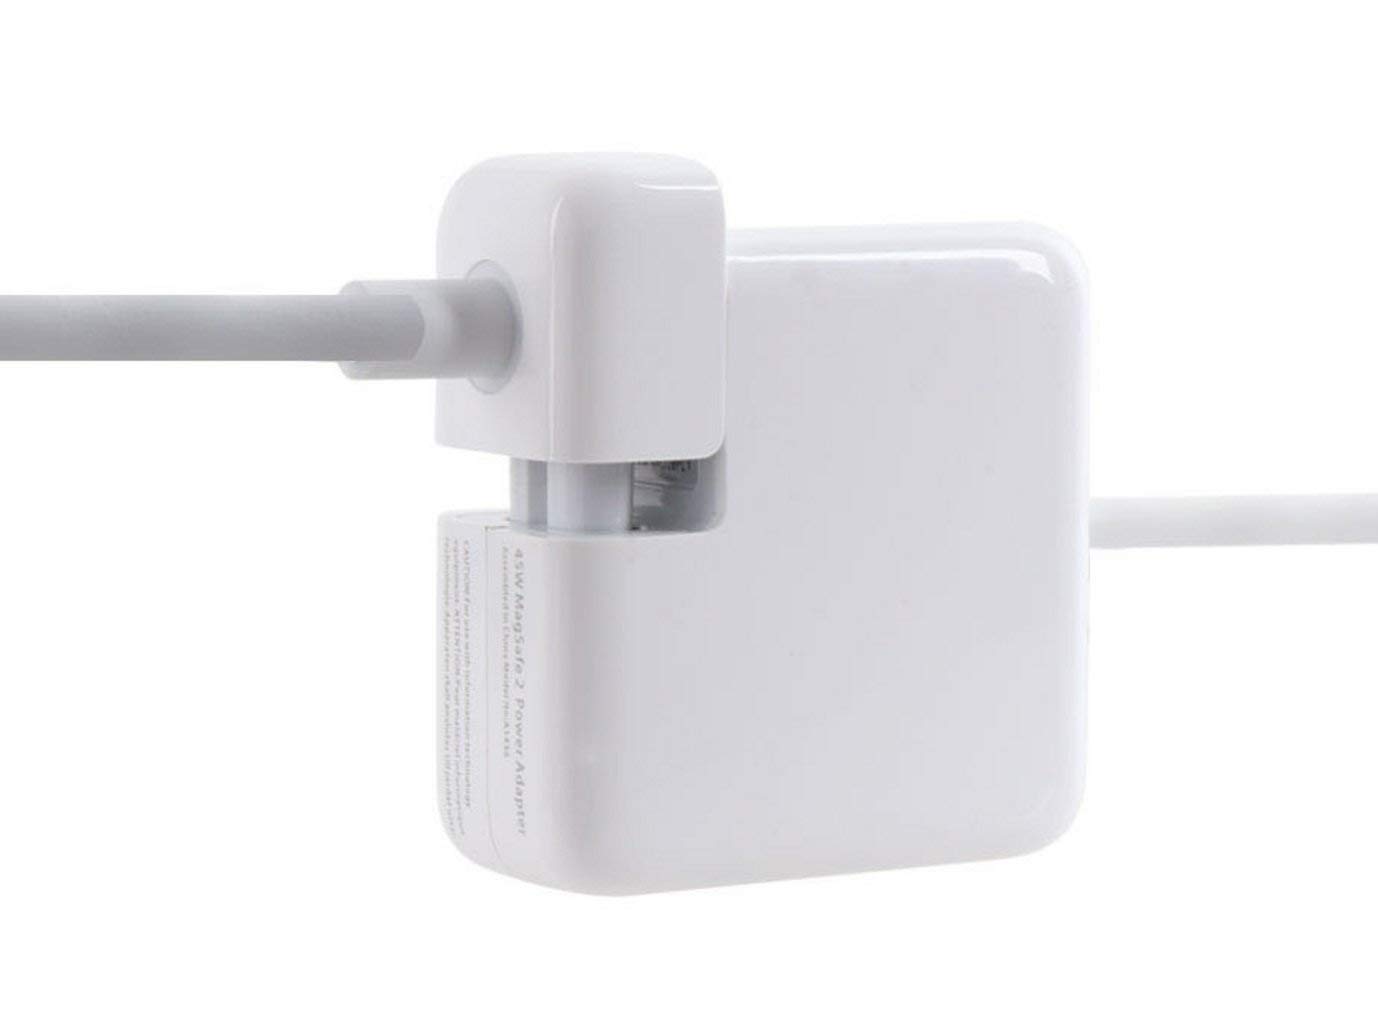 Great Power Adapter Extension Cord Wall Cord Cable, WEGWANG Cord Compatible for Apple Mac iBook MacBook Pro MacBook Power Adapters 45W, 60W, 85W MagSafe 1 or MagSafe 2 Models